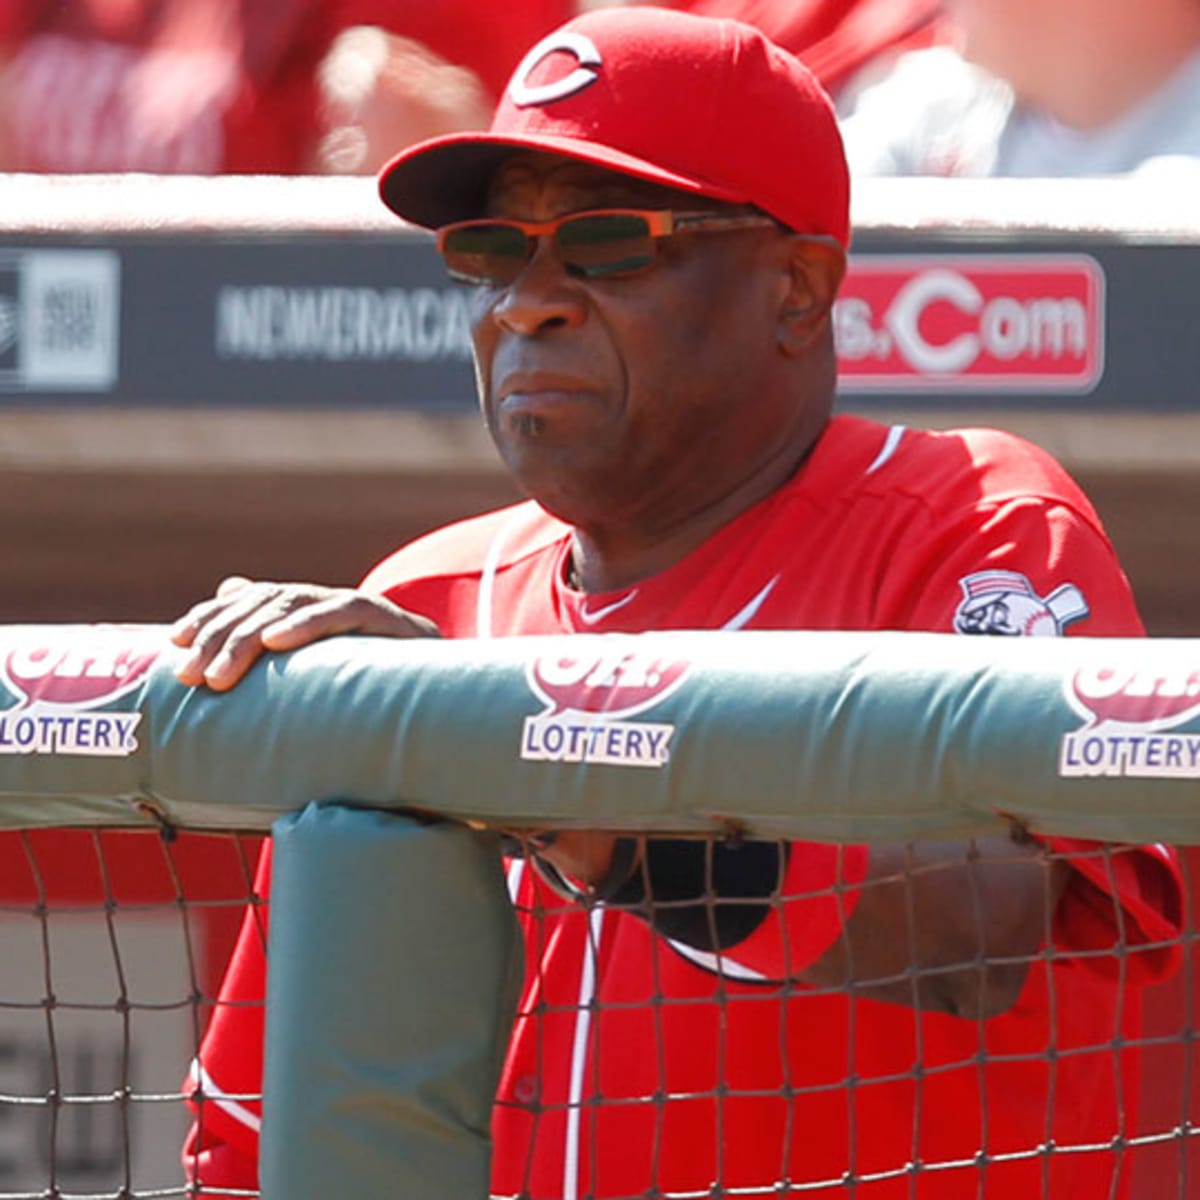 Nationals' skipper Dusty Baker on the current state of the NL East